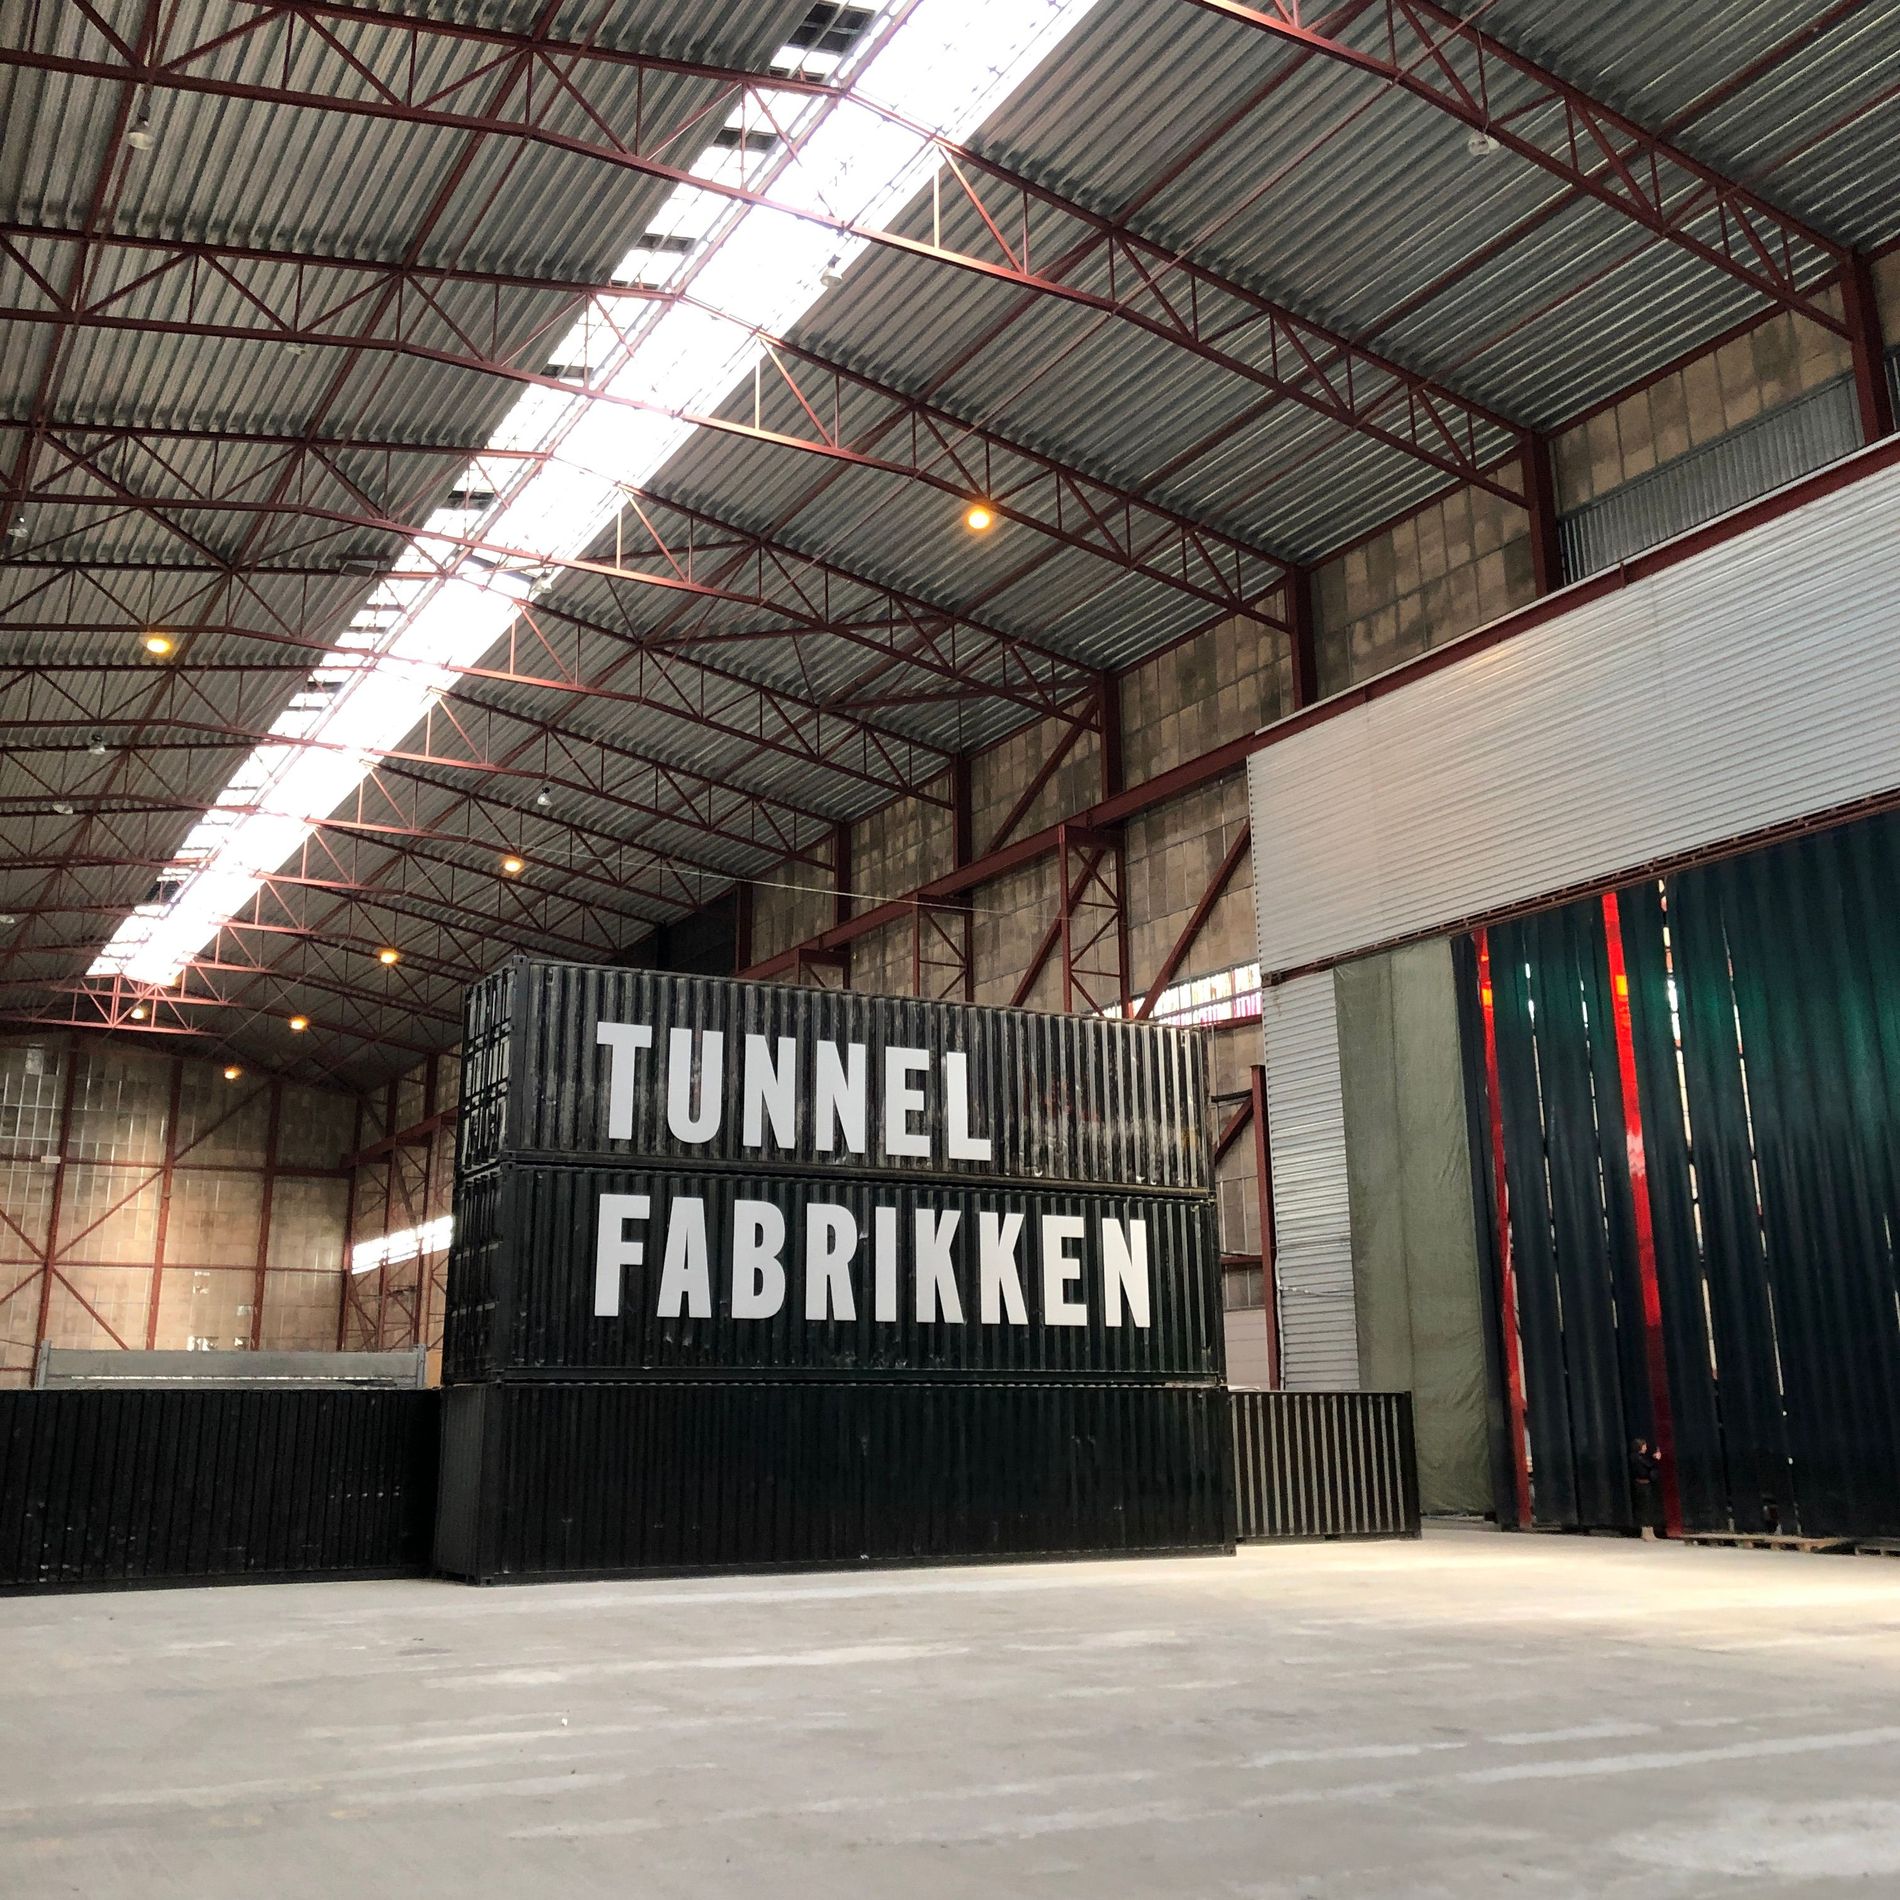 Tunnelfabrikken in Nordhavn - The location of Rotate's SS22 show